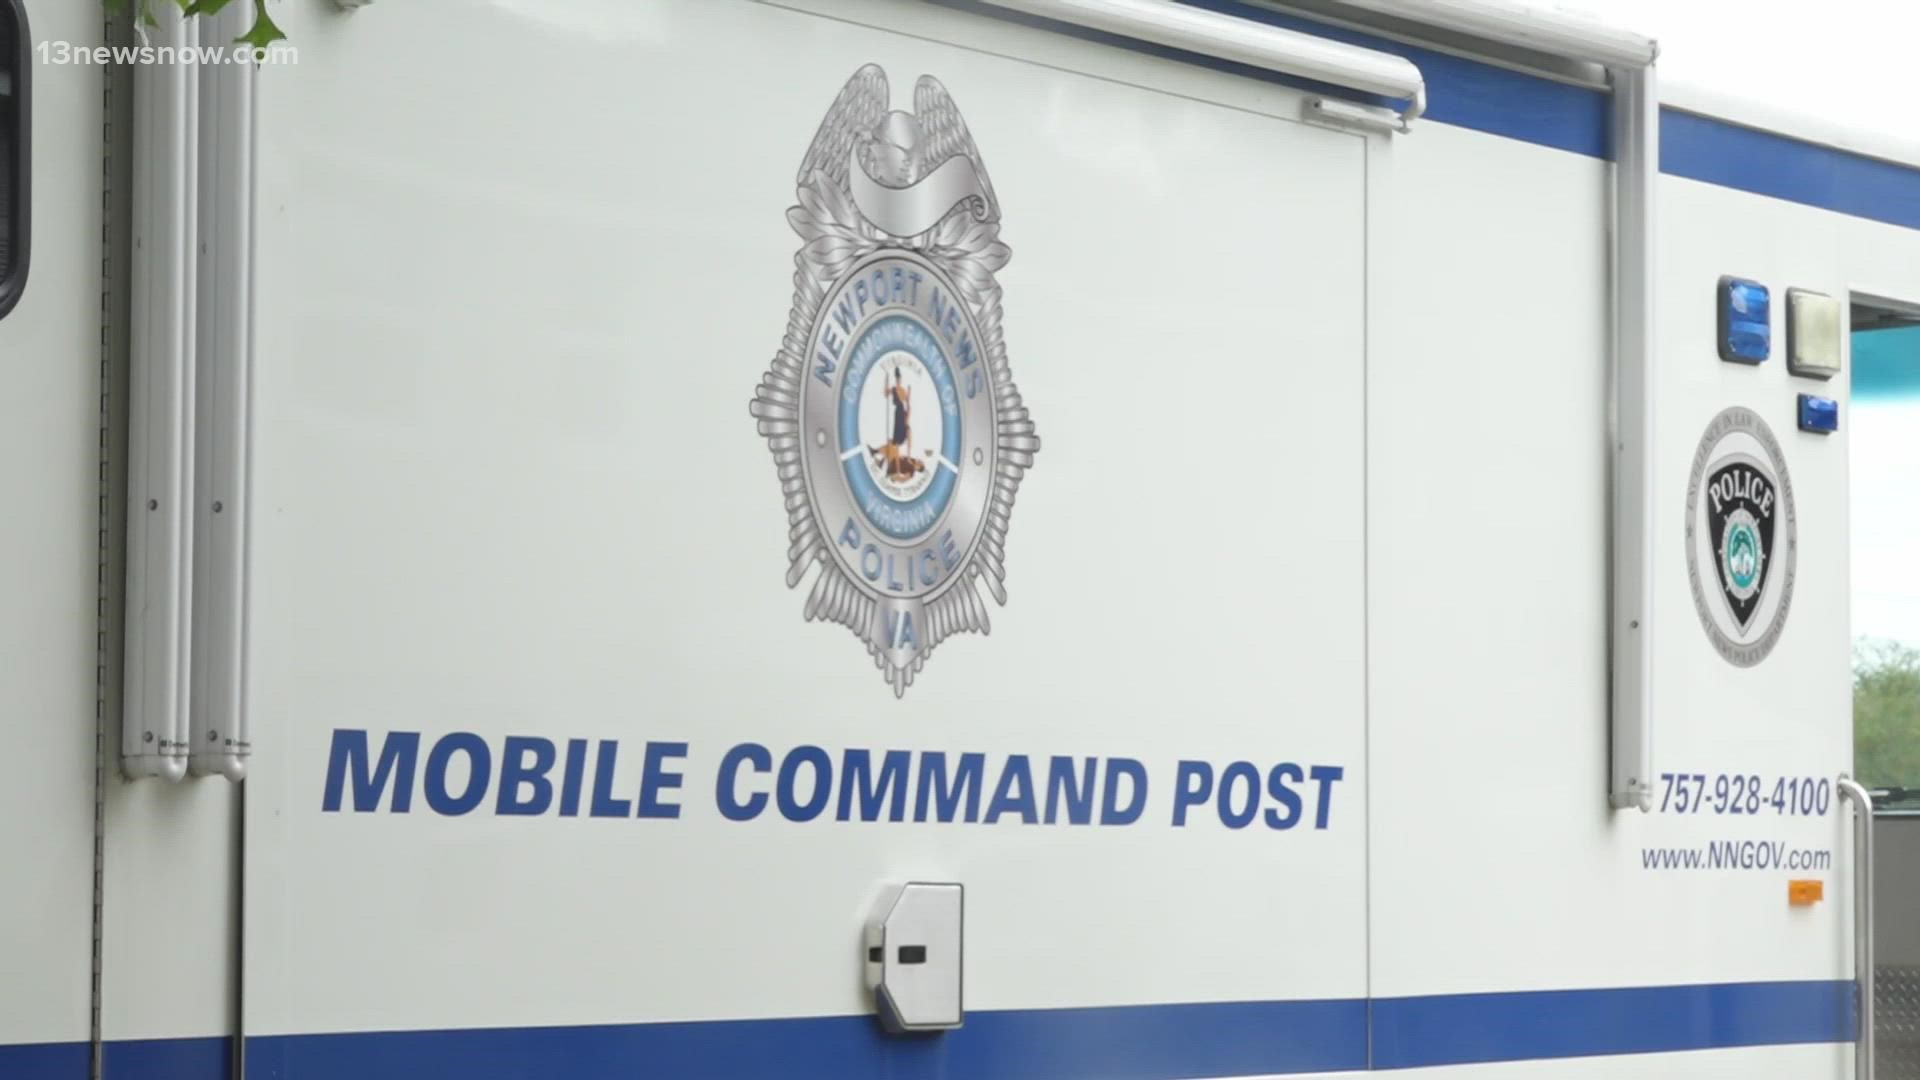 The mobile command post is used for community events, natural disasters, and critical incidents like the most recent shooting at Heritage High school.